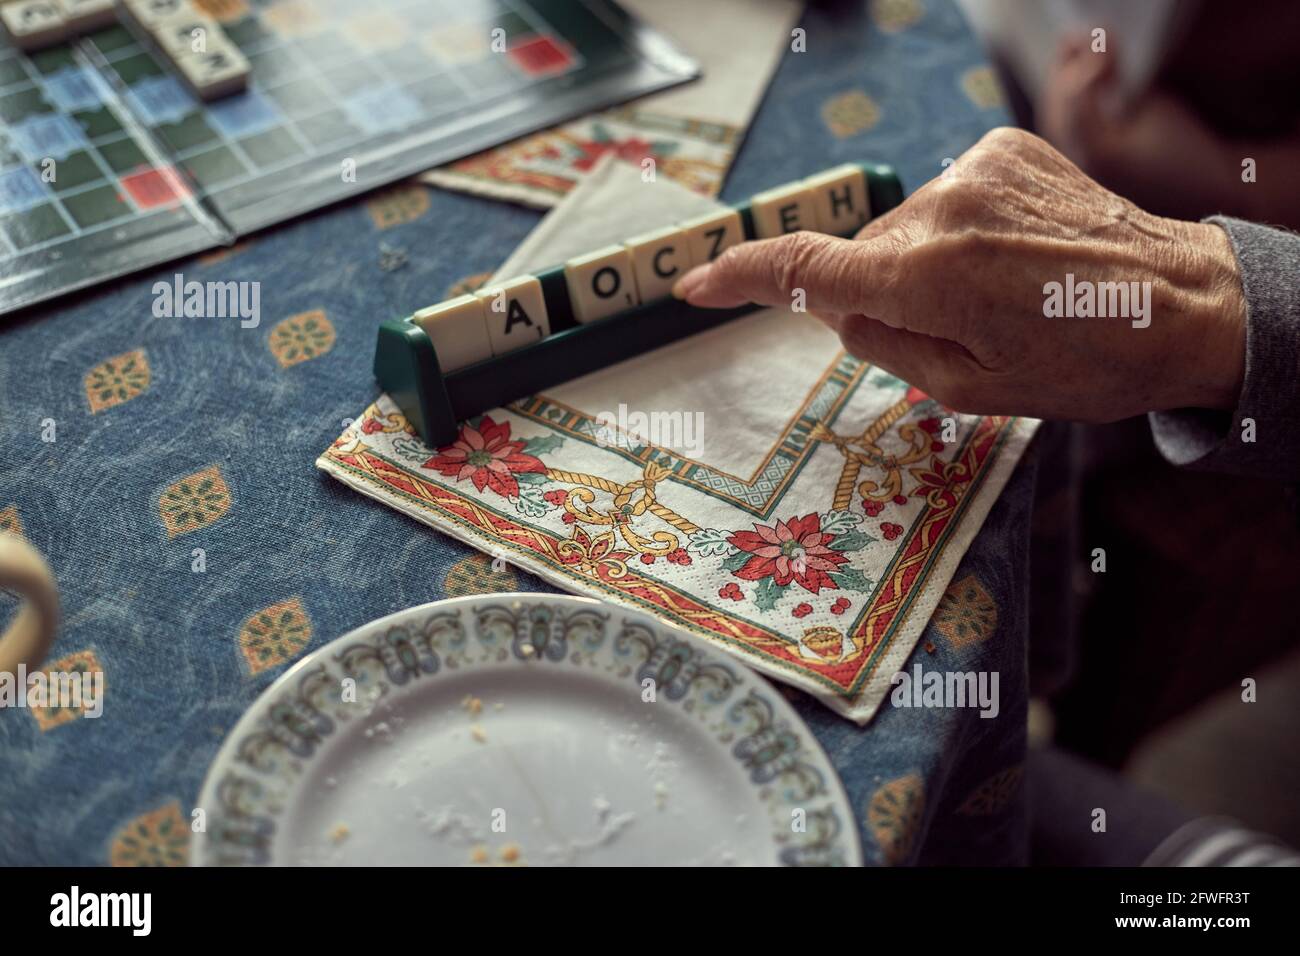 Hands of the older generation woman with arthritis, playing letters game Stock Photo